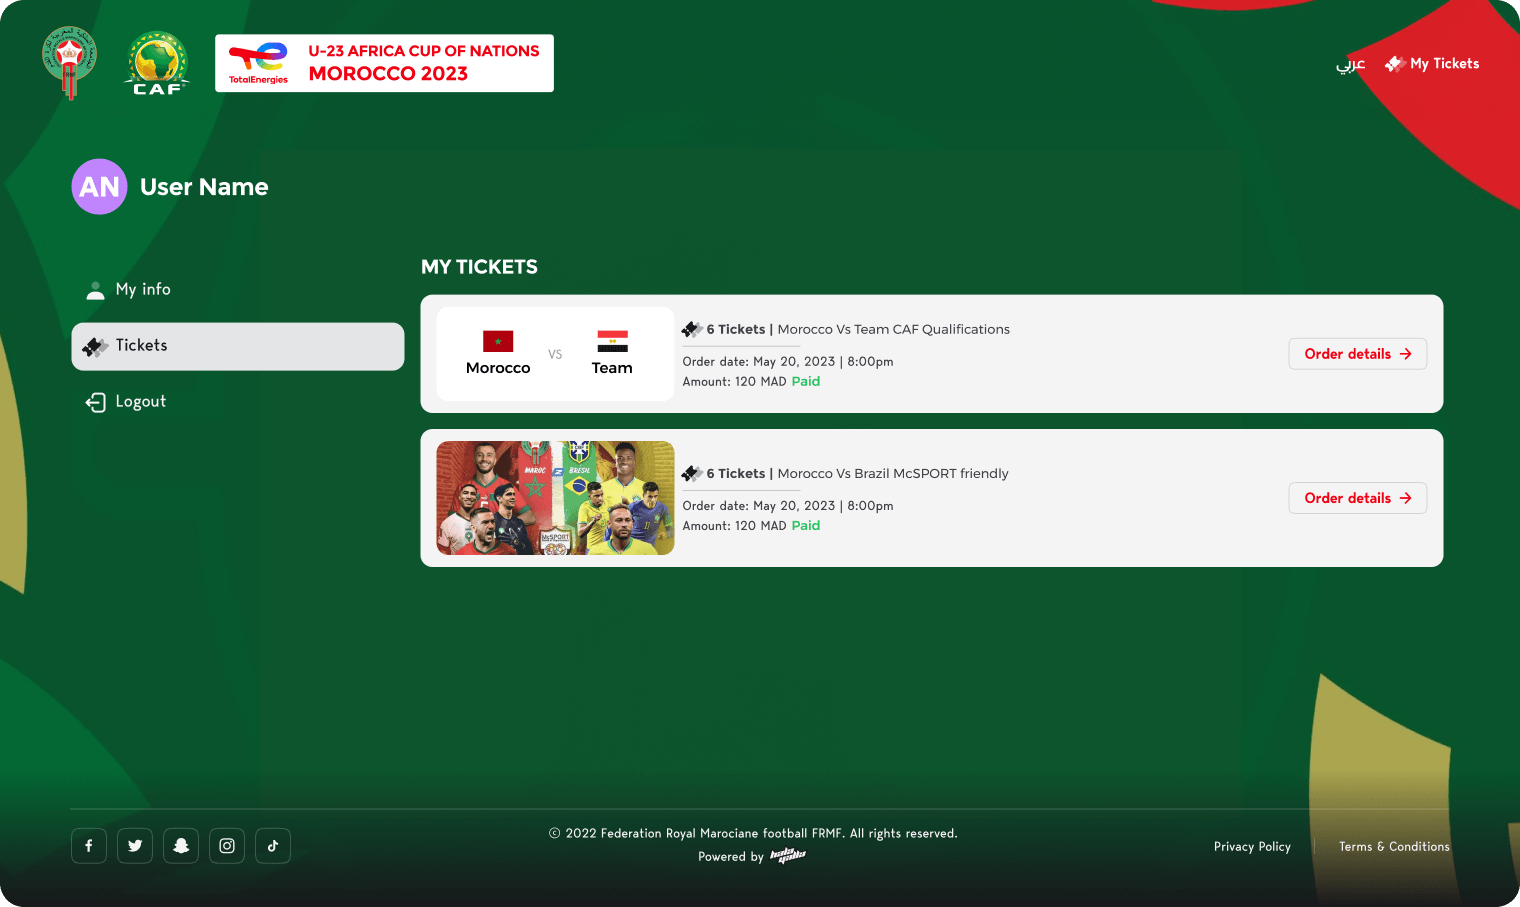 Africa Cup of Nations - Morocco 2023